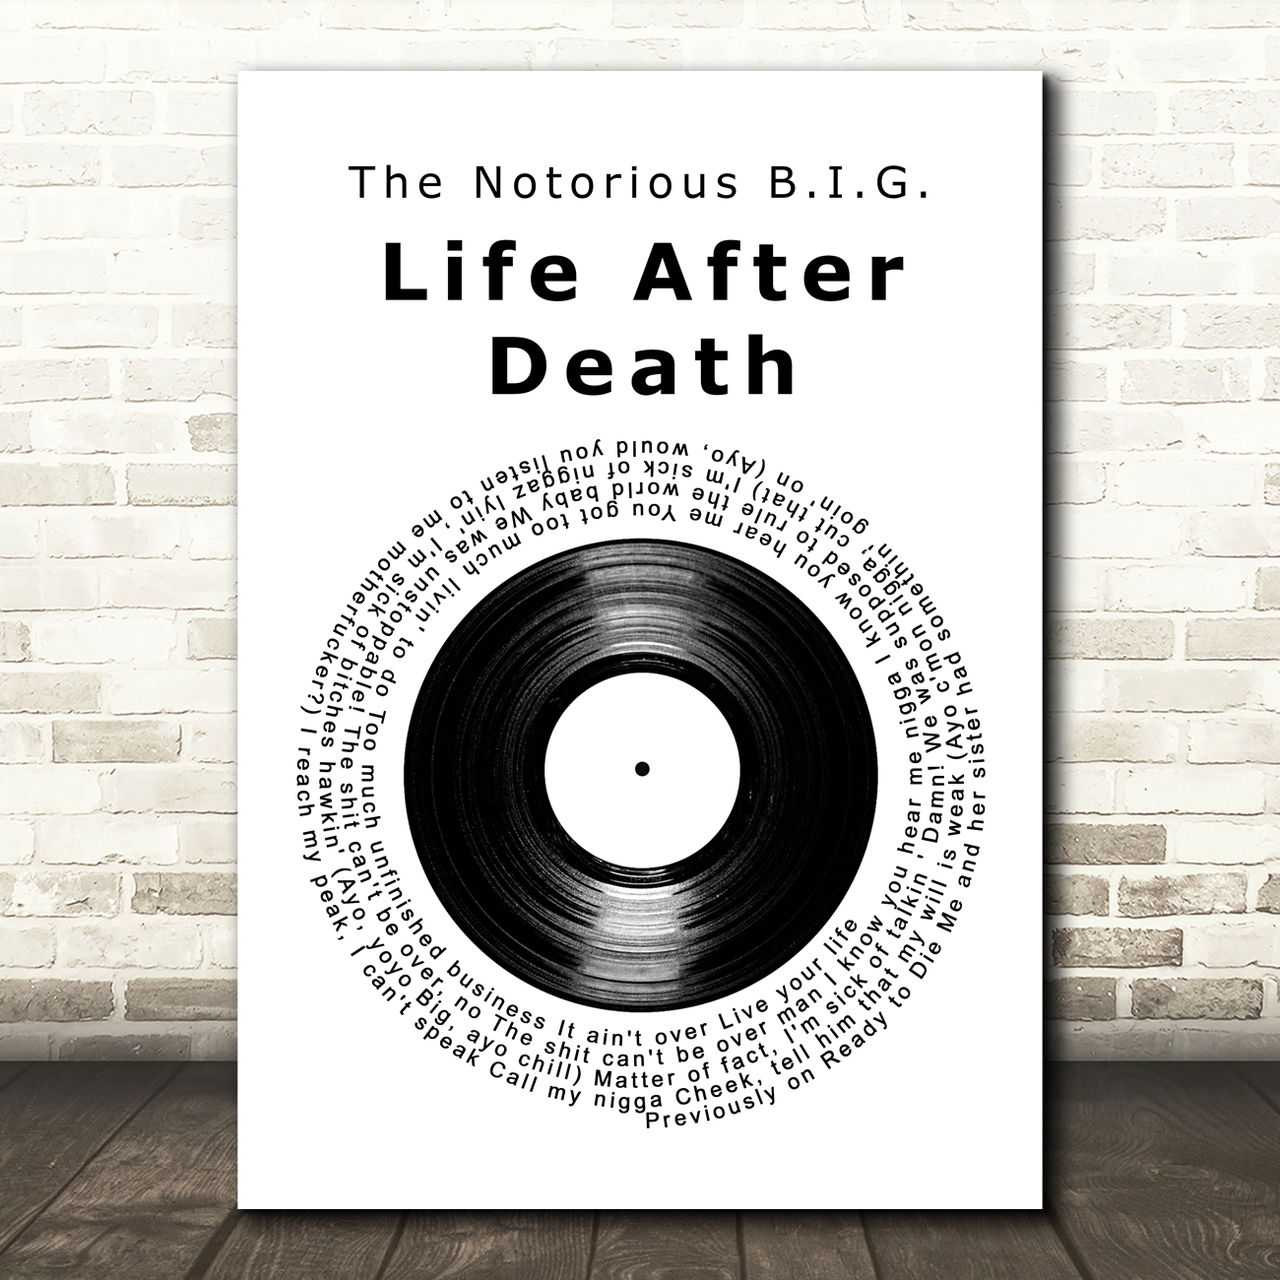 The Notorious B.I.G. Life After Death Vinyl Record Song Lyric Art Print